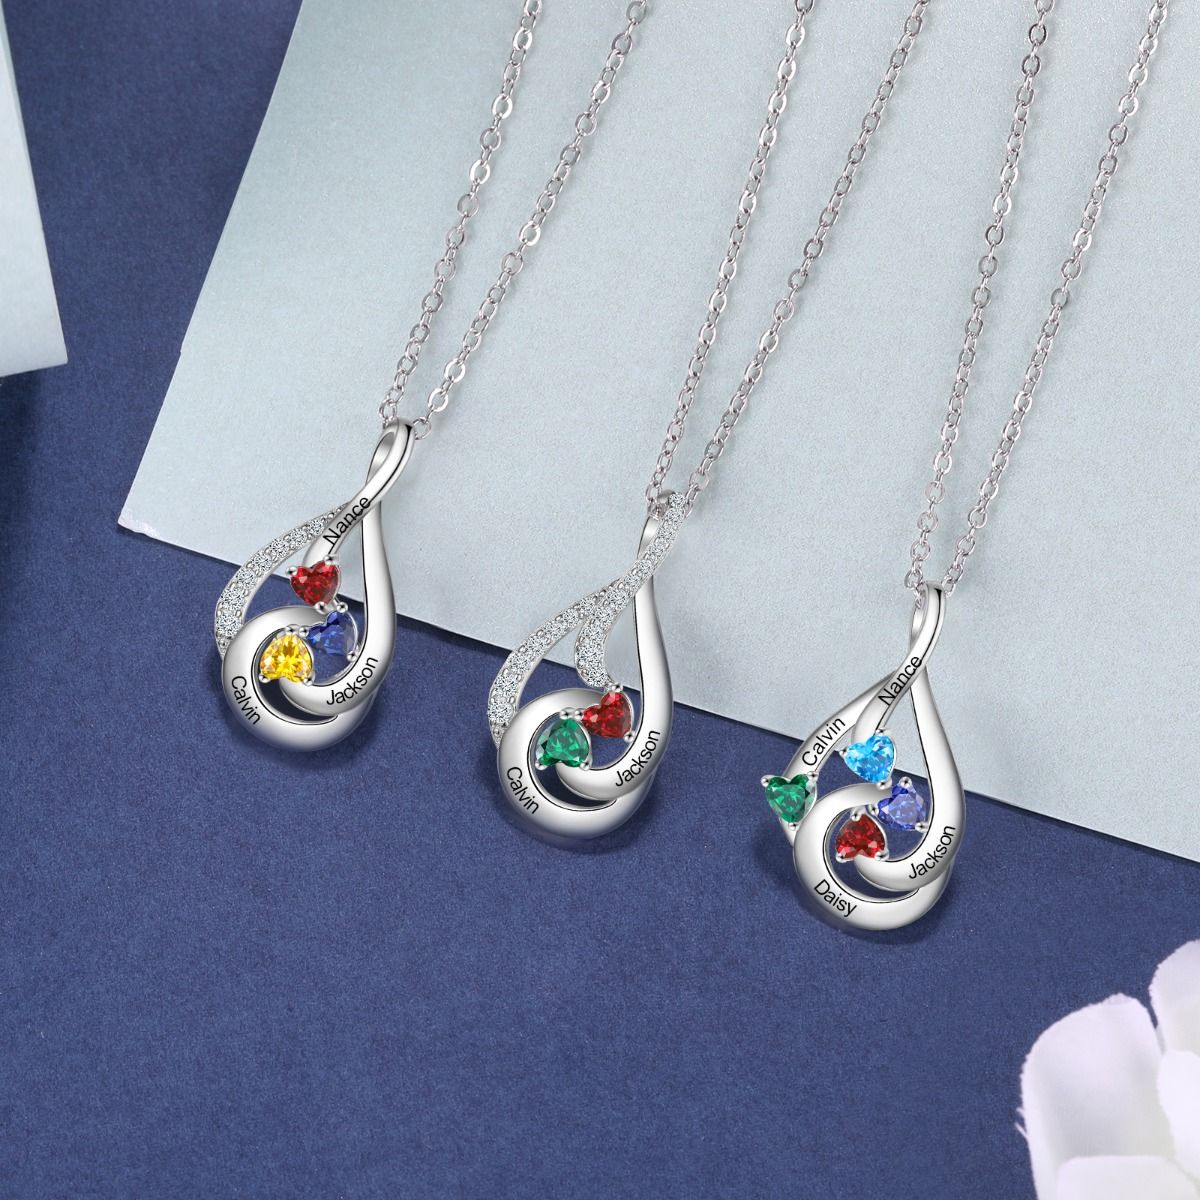 Customised Drop Shape Necklace With 2-4 Birthstones | Bespoke Engraved Names Necklace With Birthstones